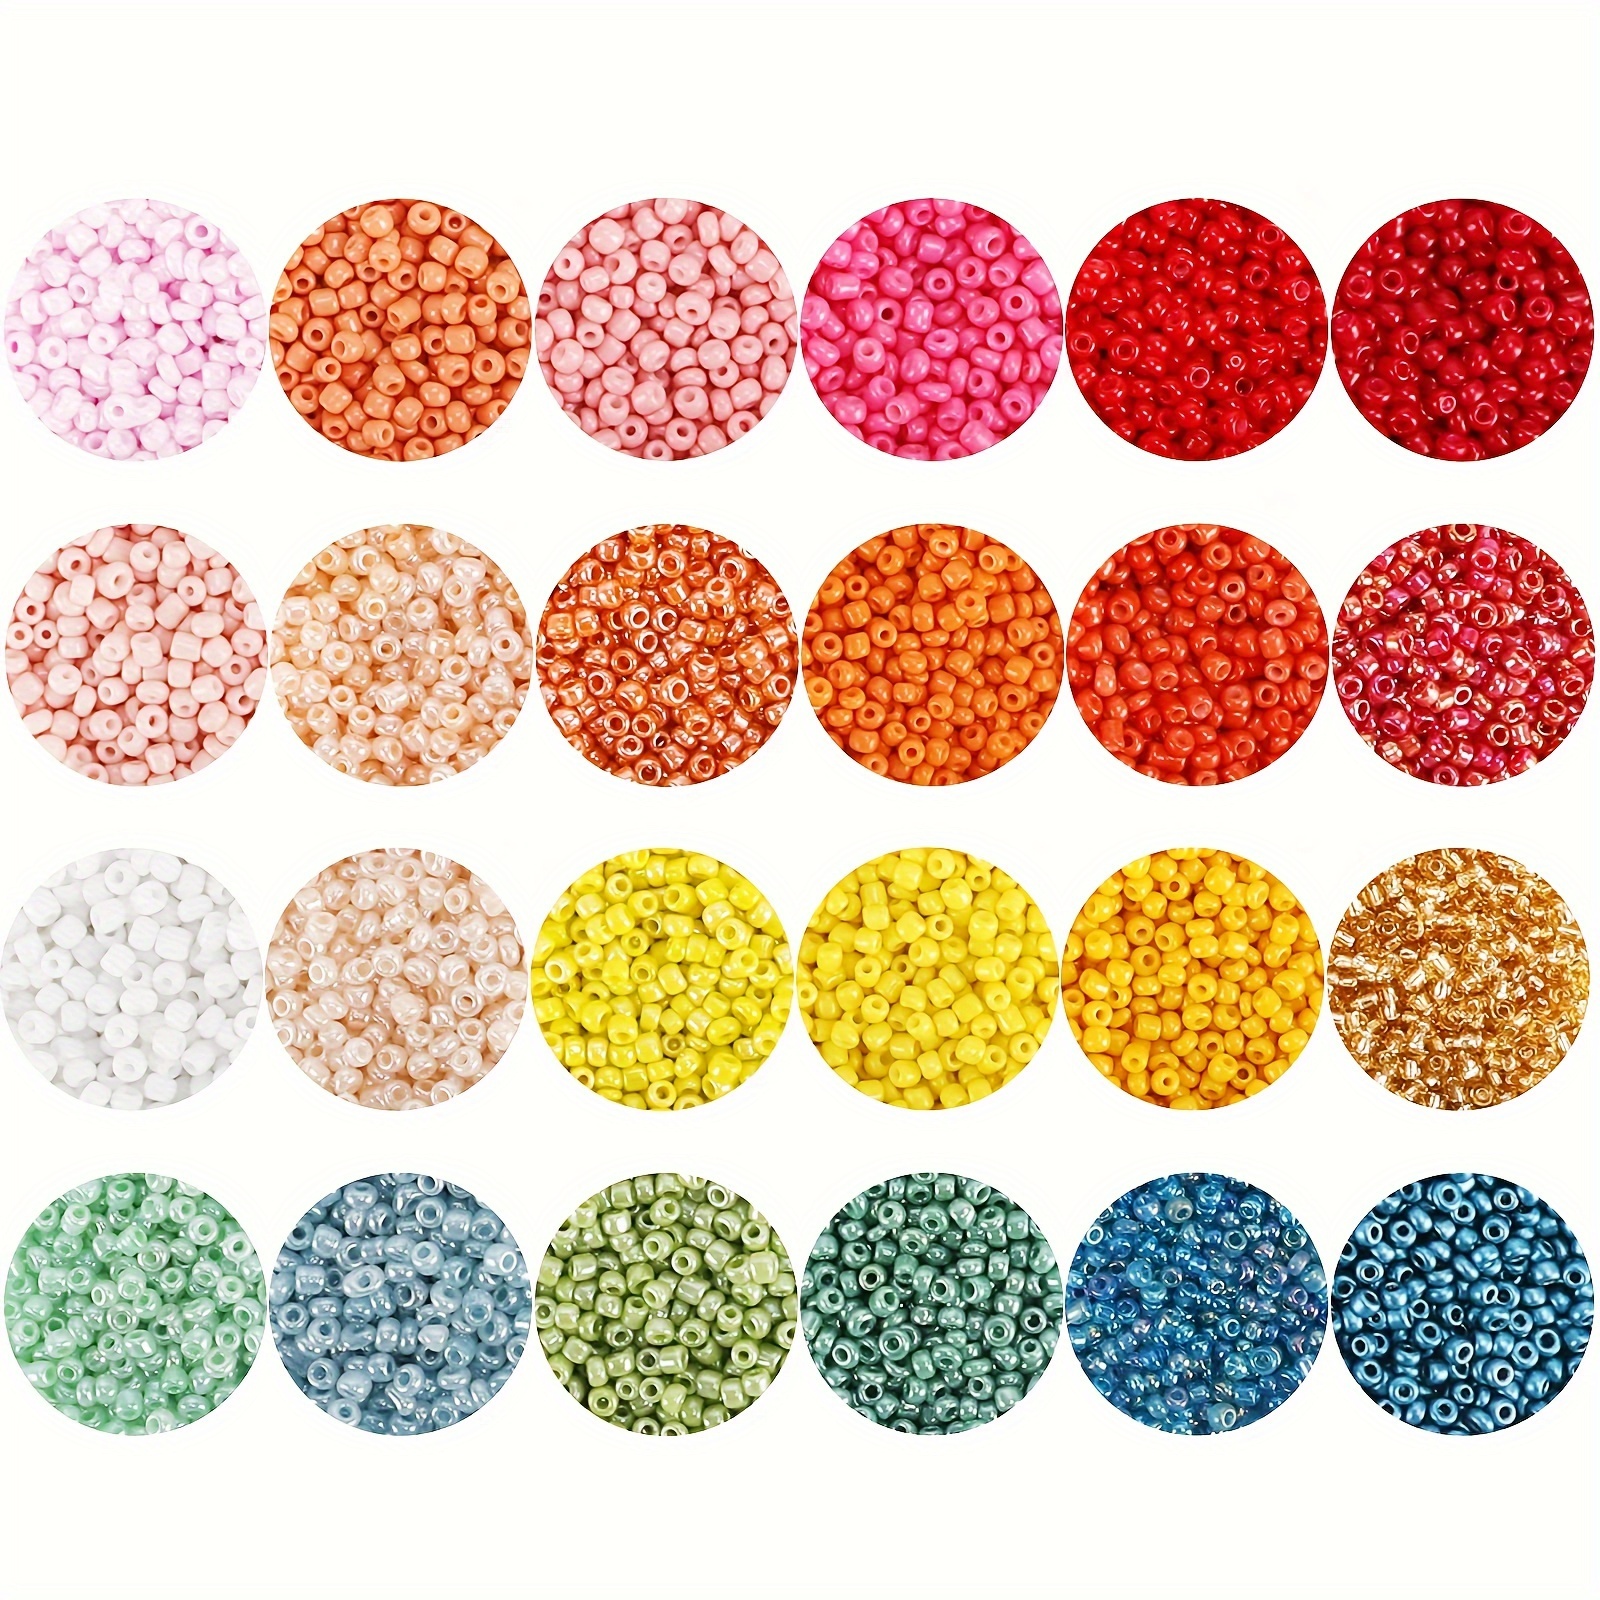 KERGAEN Size 2mm 12/0 Seed Beads About 15600pcs, Small Seed Beads Supplies  with Elastic String,Jump Ring and Charms for Making Earring,Bracelet and